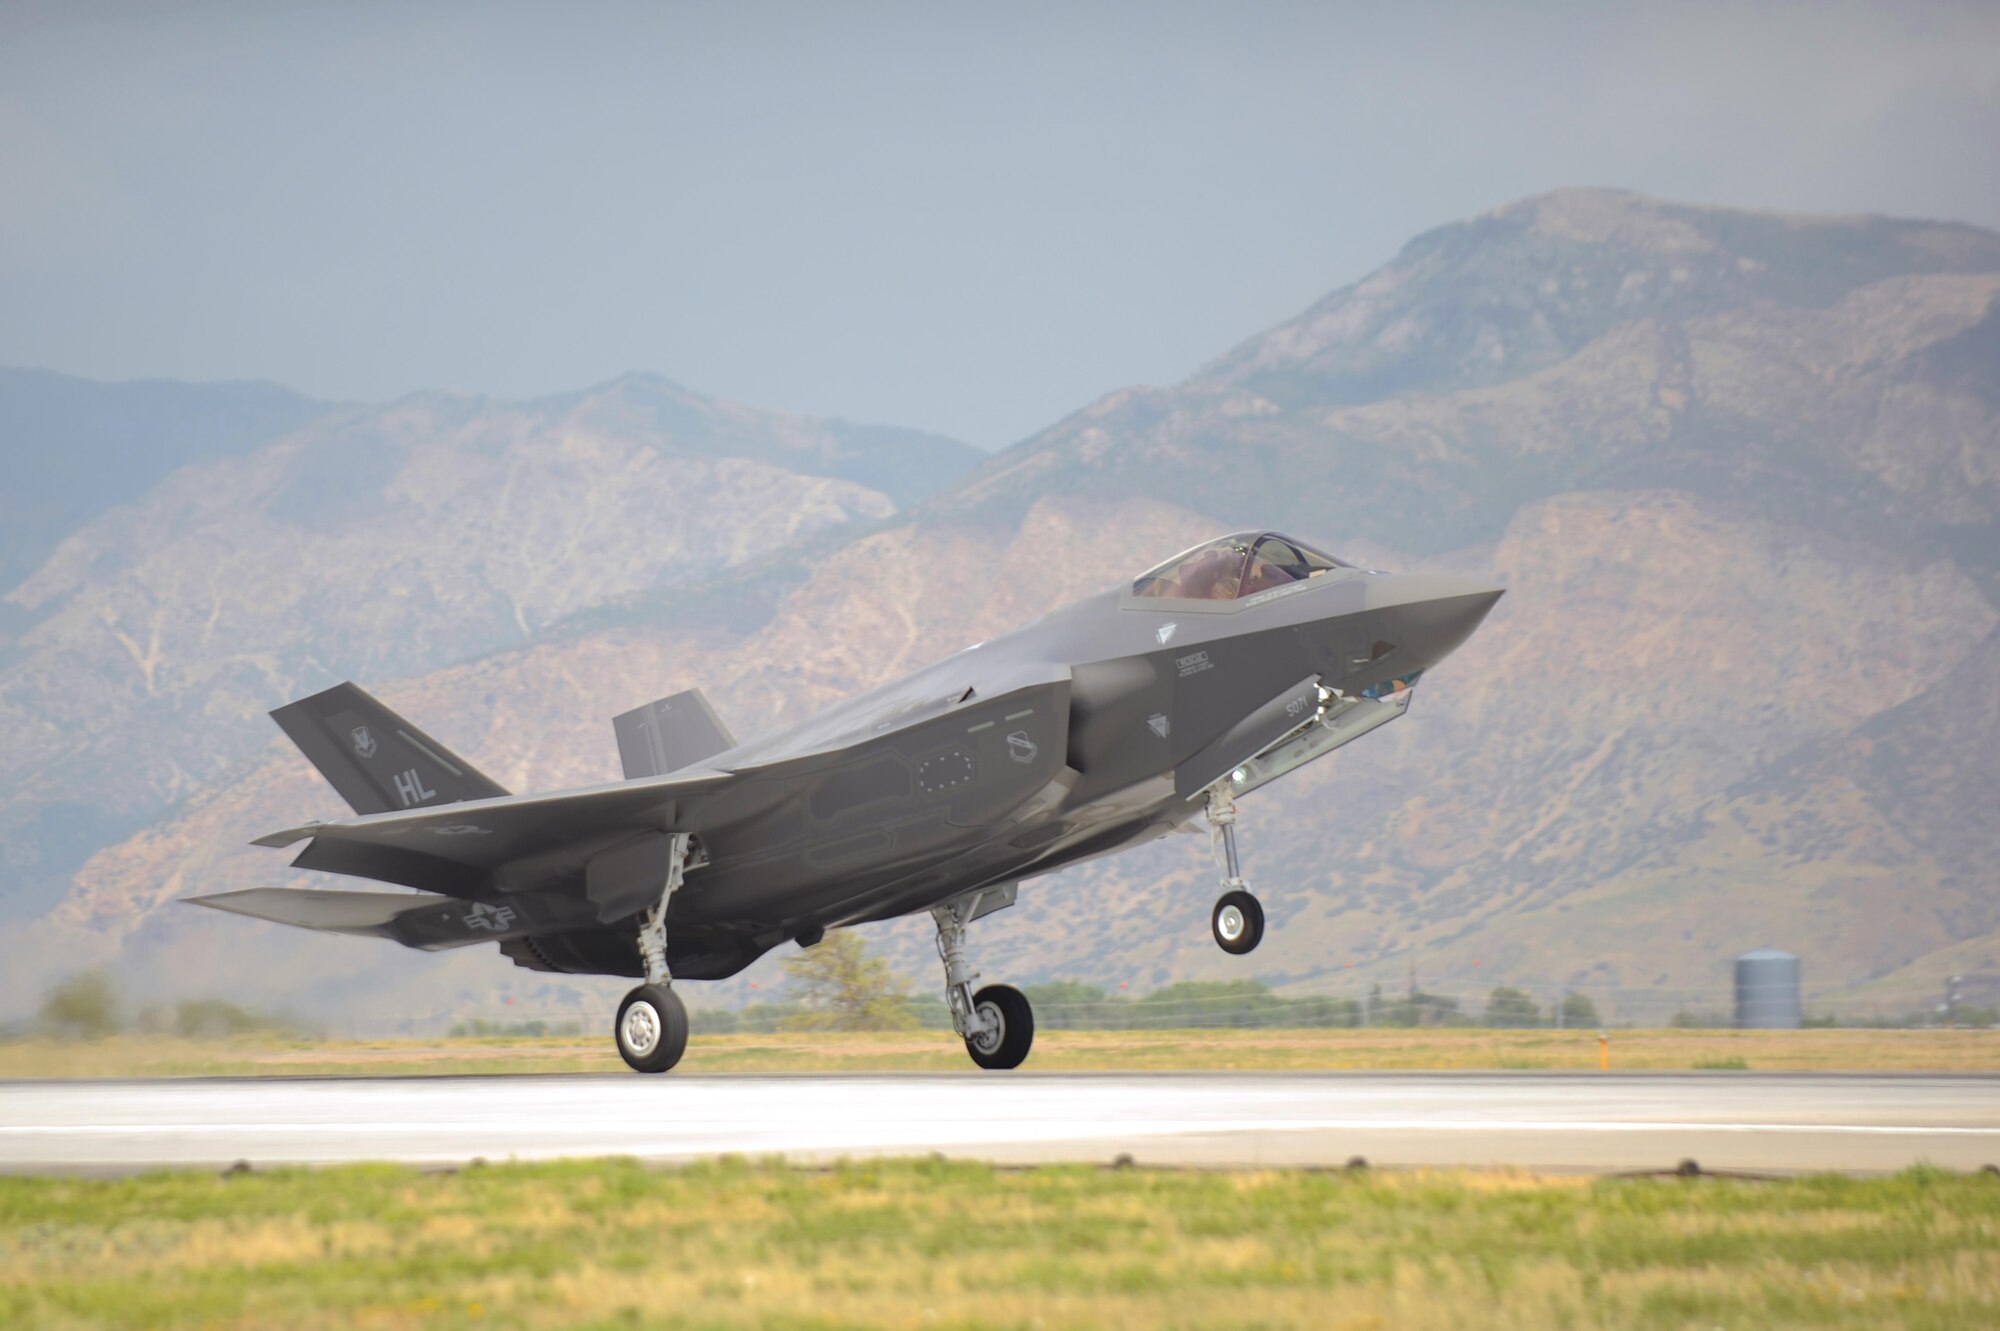 An F-35A Lightning II aircraft piloted by Col. David Lyons, the 388th Fighter Wing commander, touches down at Hill Air Force Base, Utah, Sept. 2, 2015. This and another fighter jet piloted by Lt. Col. Yosef Morris, the 34th Fighter Squadron director of operations, were the first two operational F-35s received at the base. The rest of the fleet of up to 72 F-35s are slated to arrive on a staggered basis through 2019. (U.S. Air Force photo/Todd Cromar)
